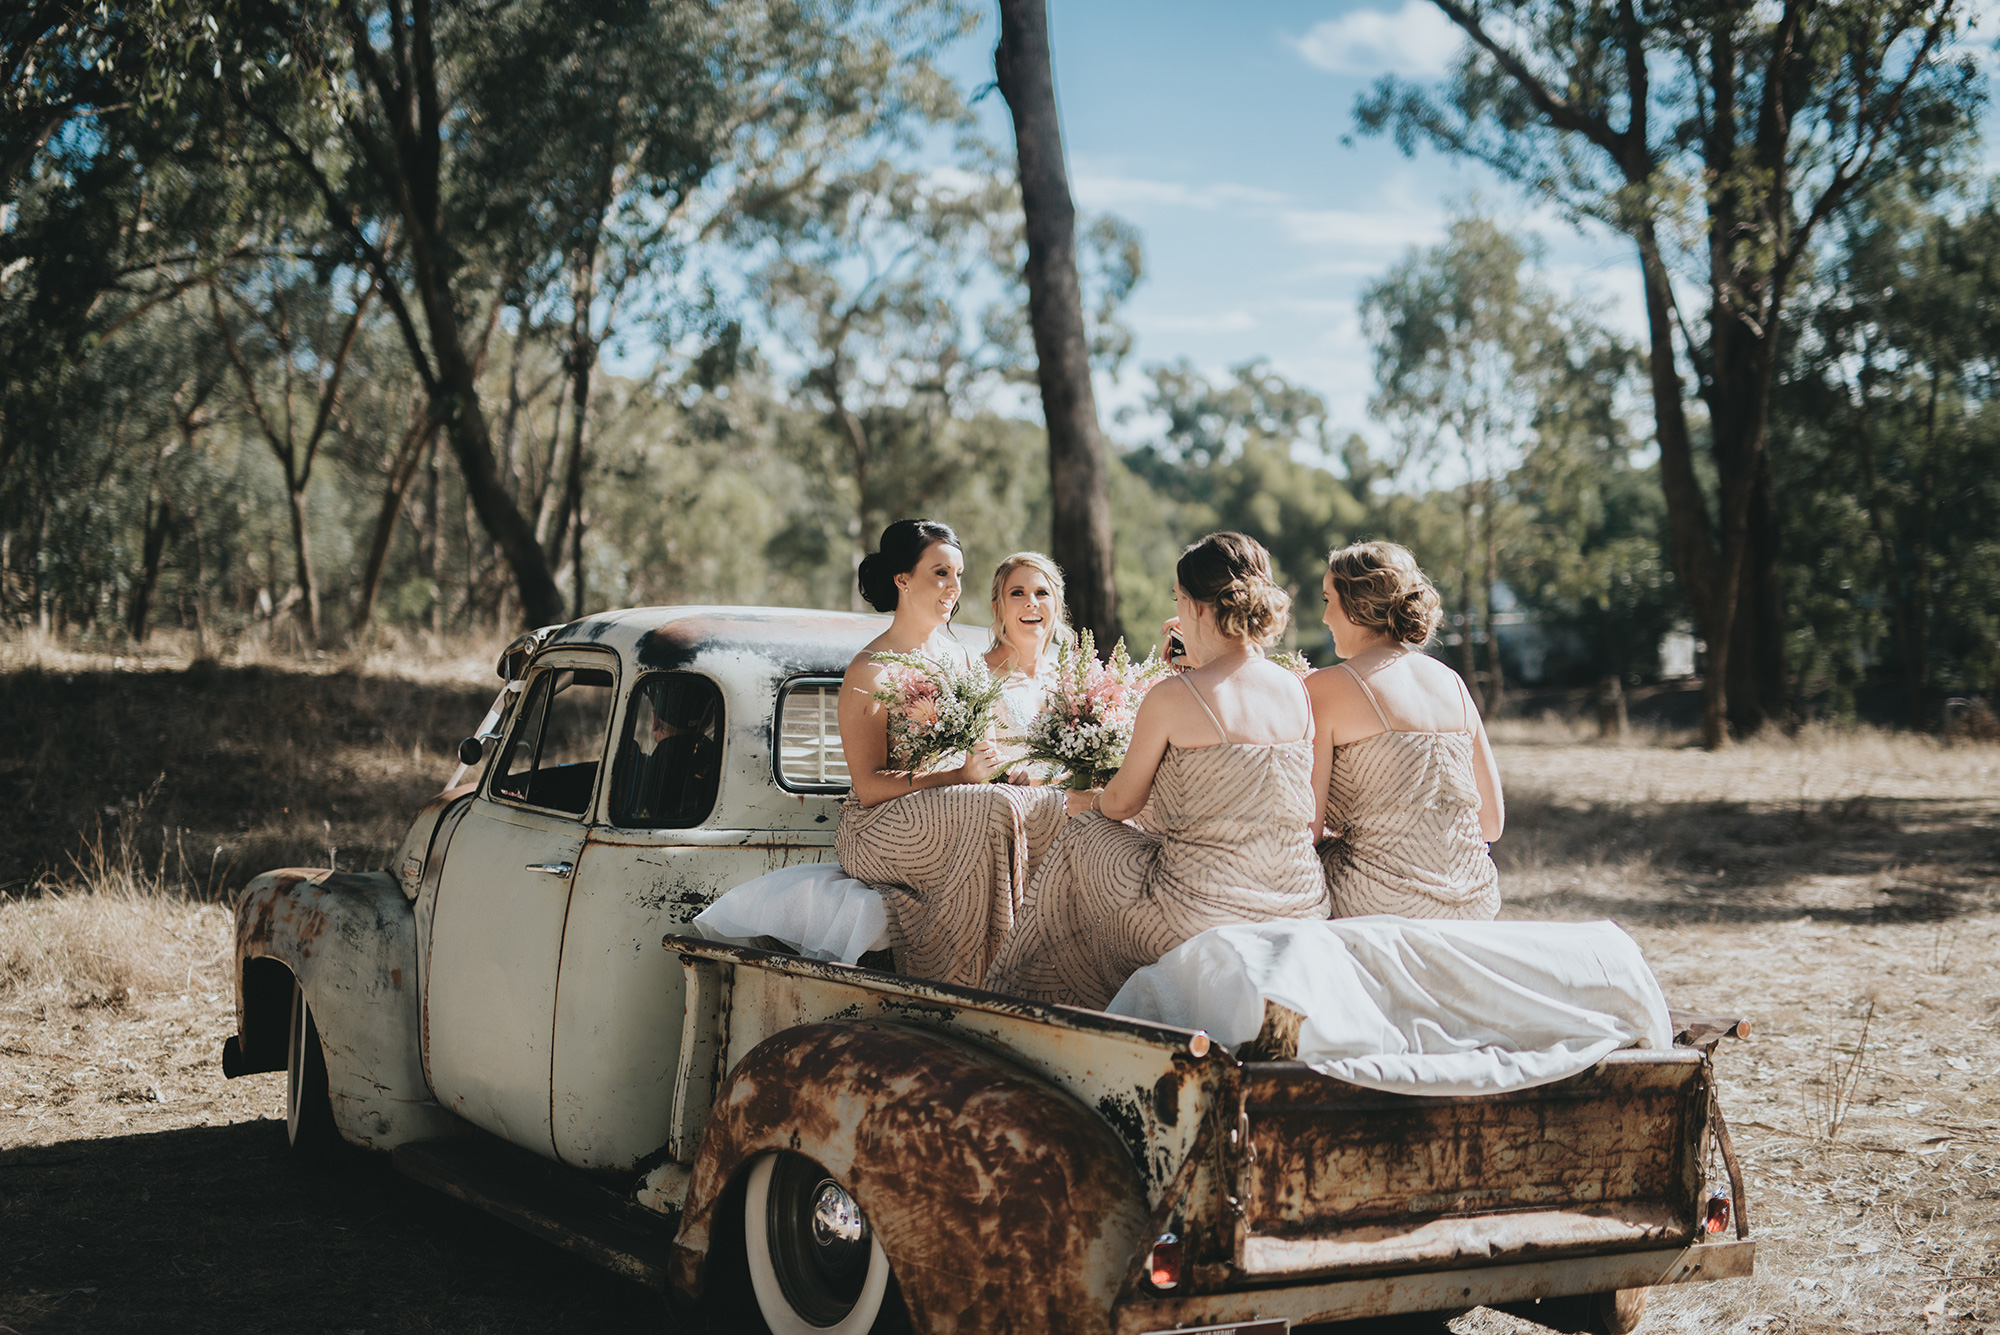 Kate_Tristan_Country-Rustic-Wedding_003